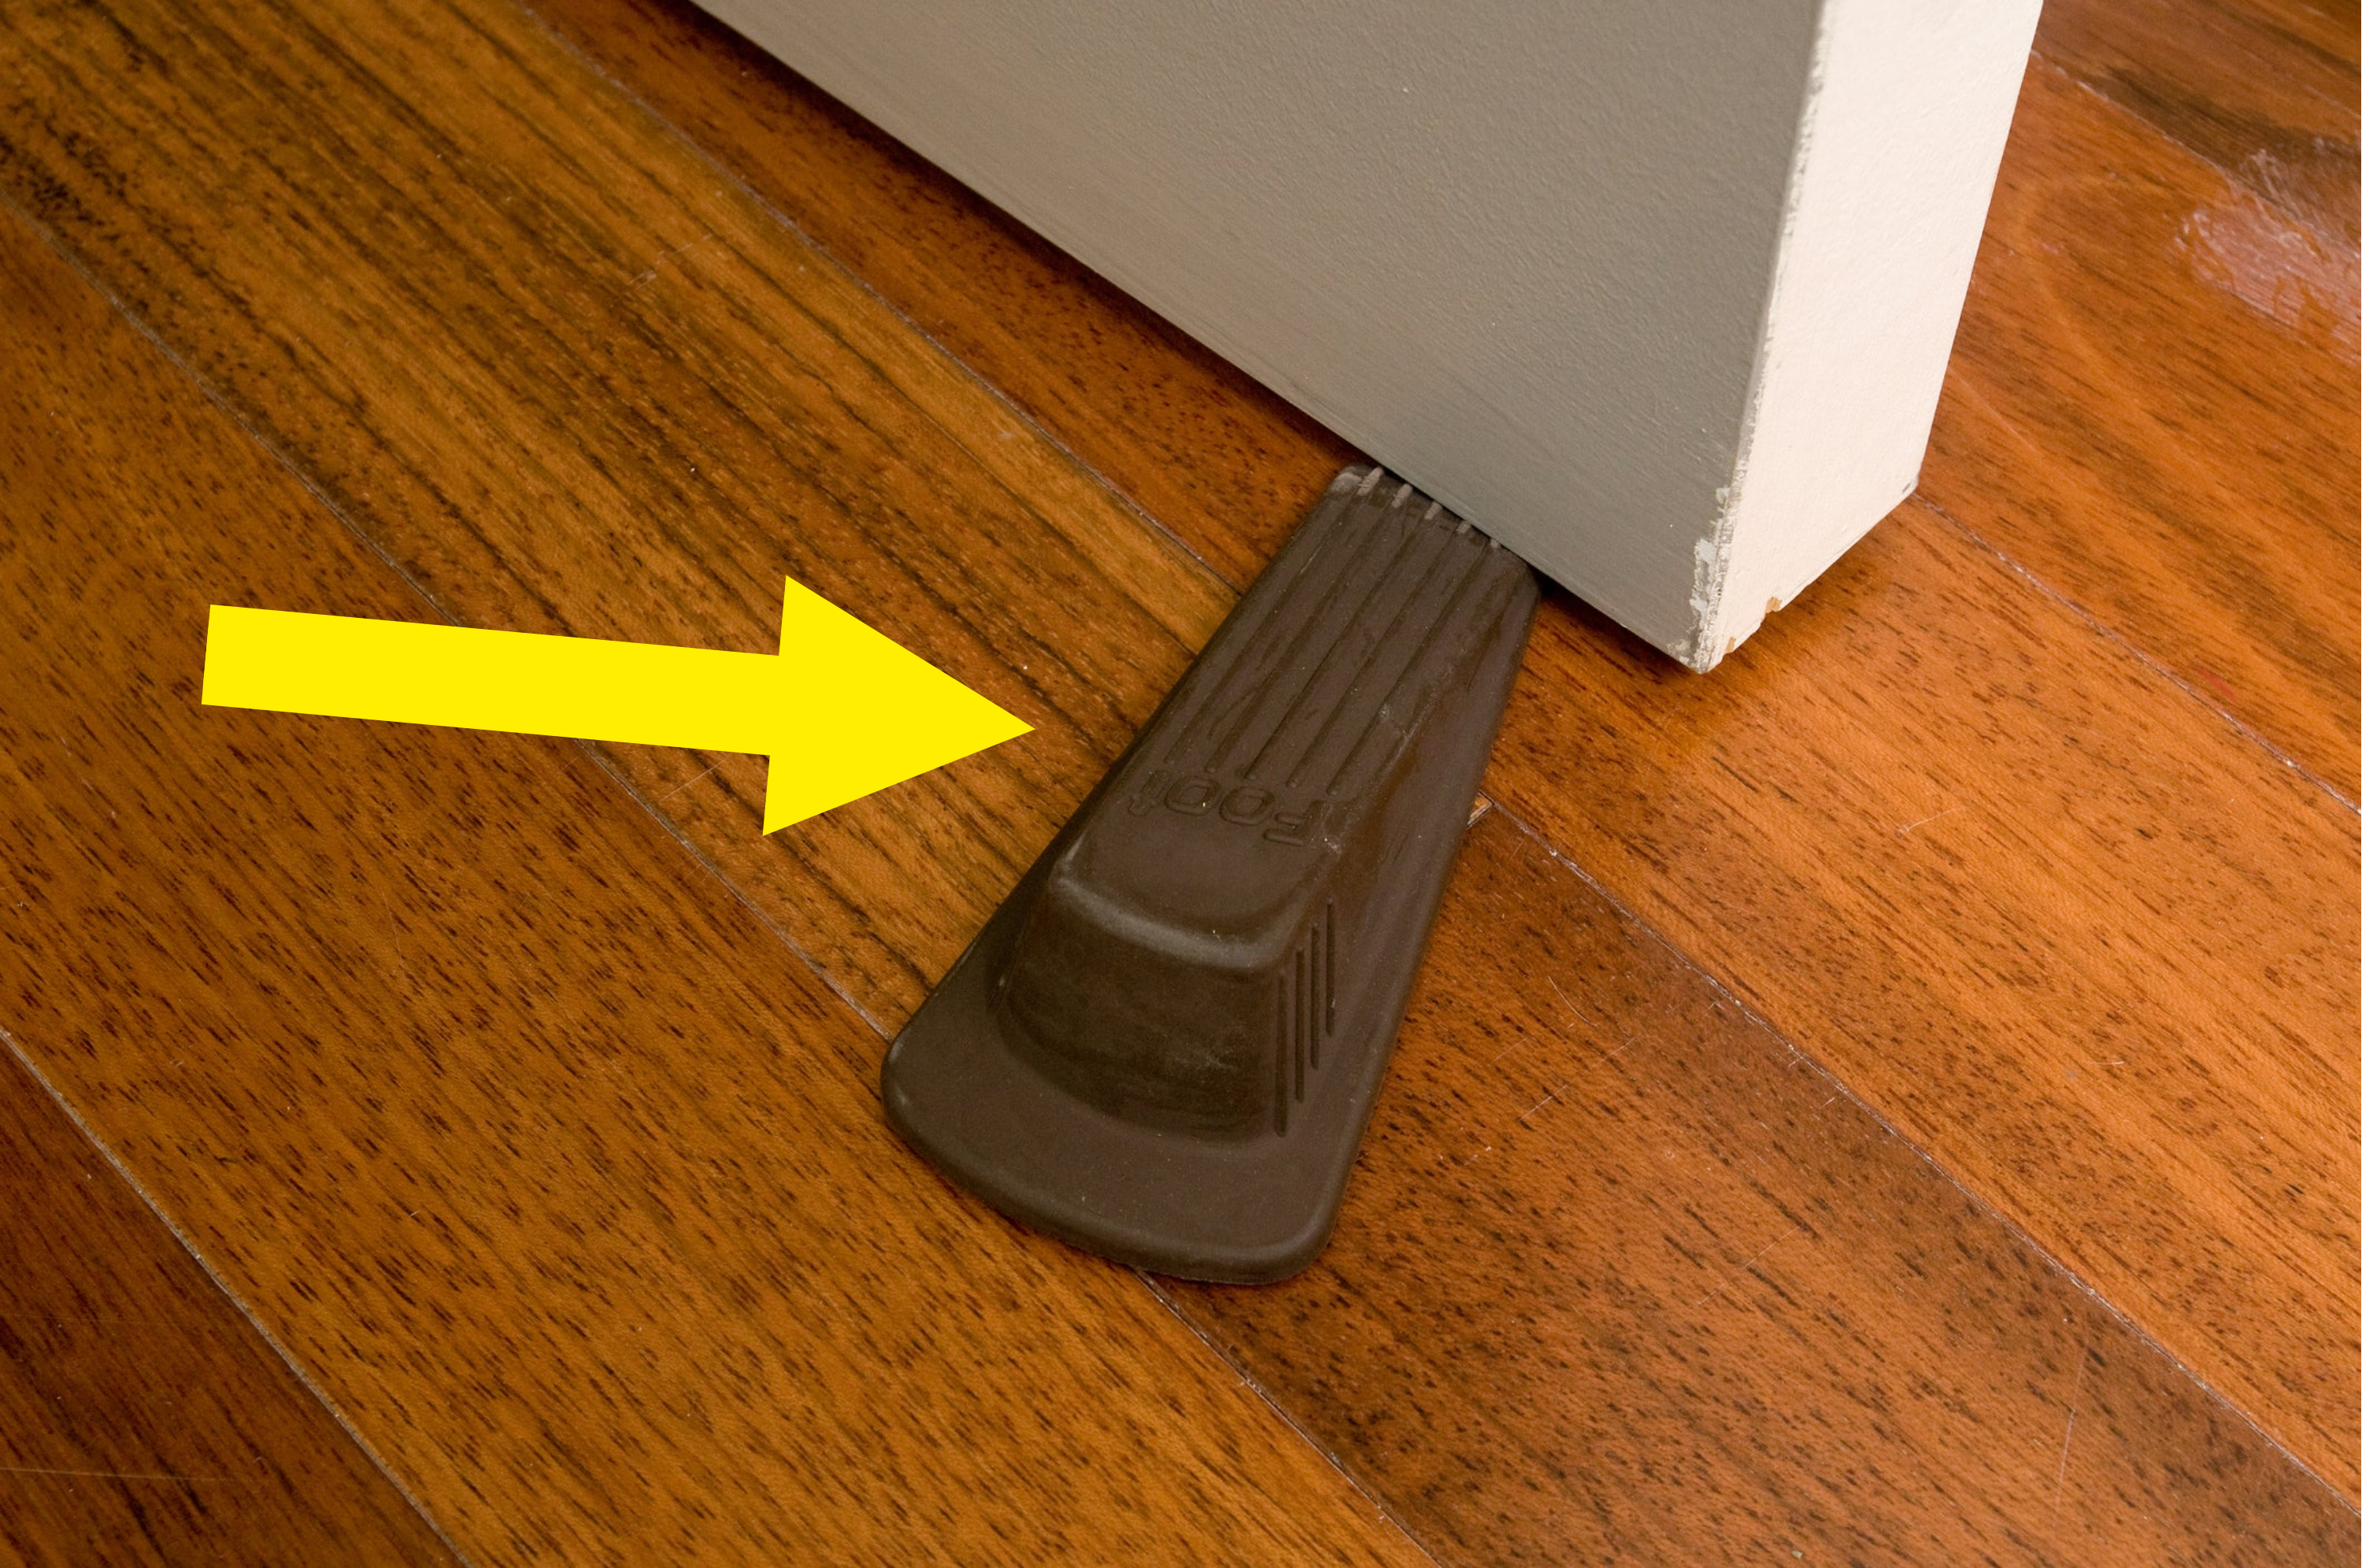 Doorstop securing an open door, relating to the practical aspects of travel accommodations